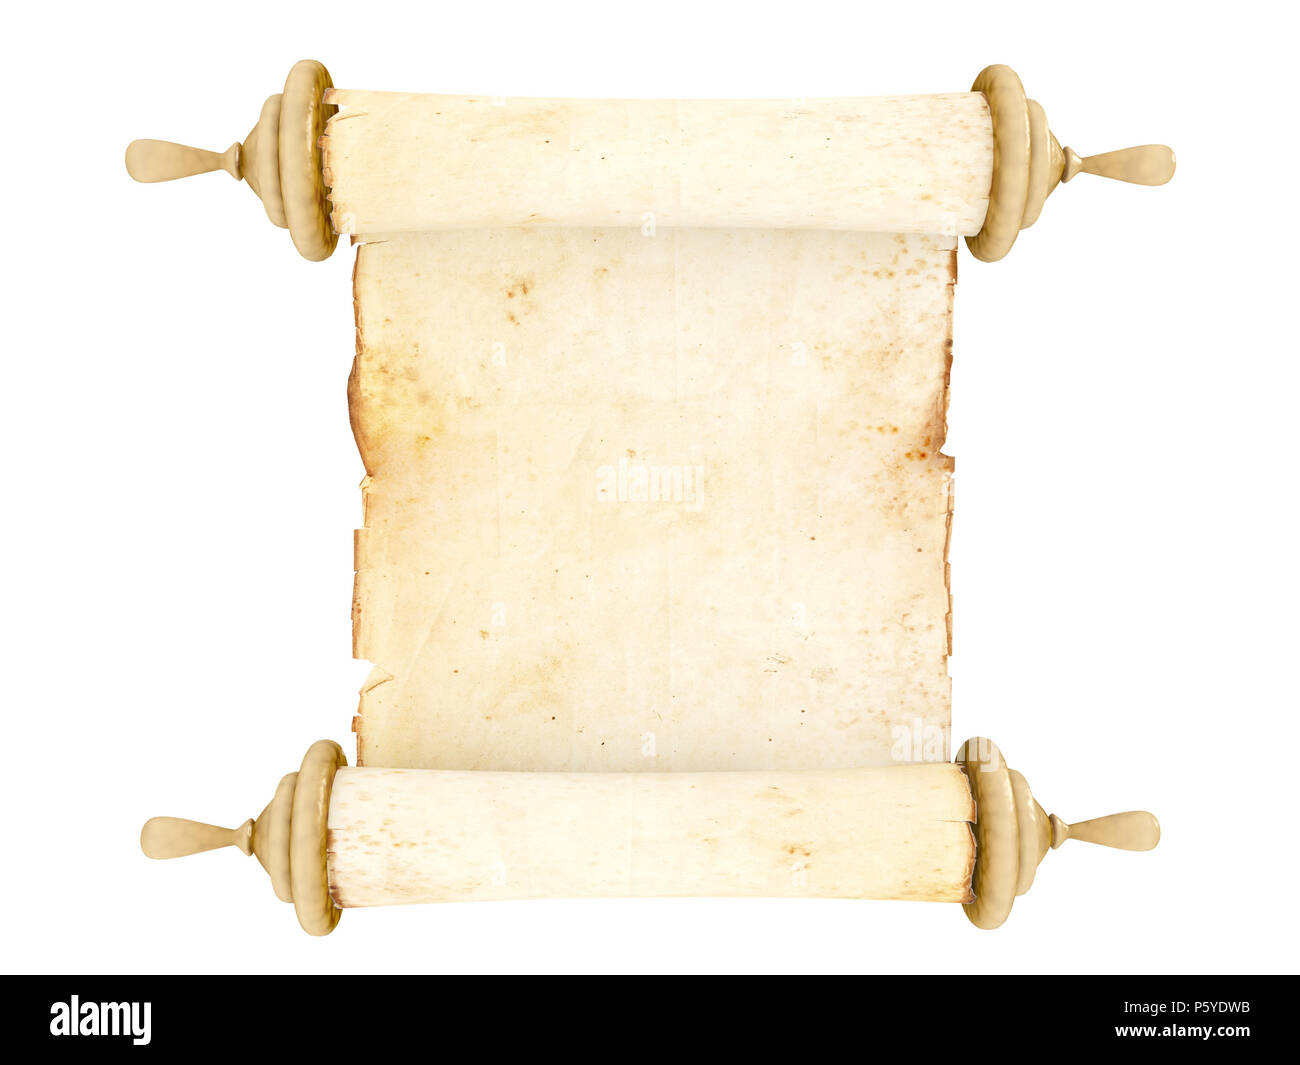 Vintage paper scroll isolated on white Stock Photo by ©AlexanderNovikov  171950268